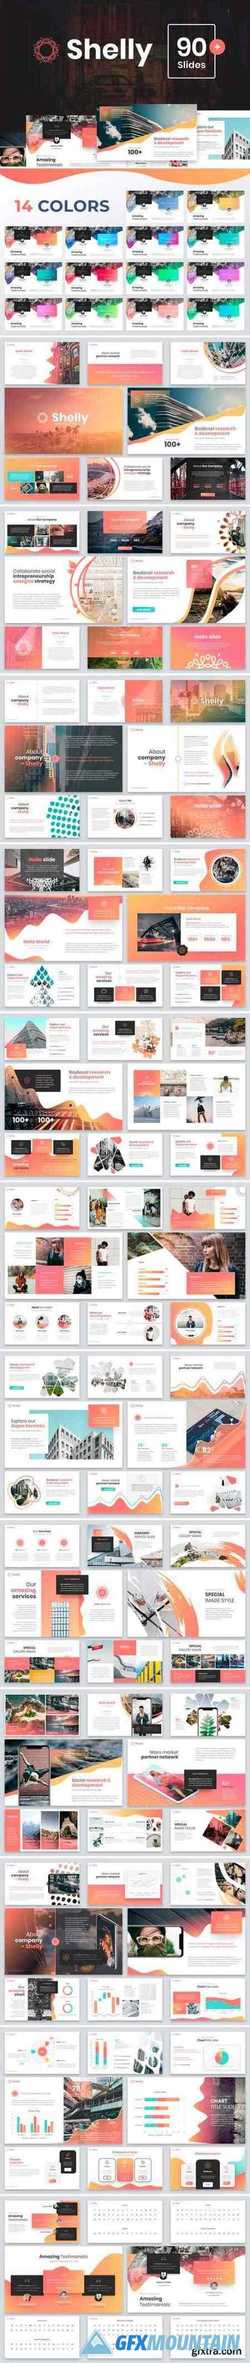 Shelly Powerpoint Template 2543049